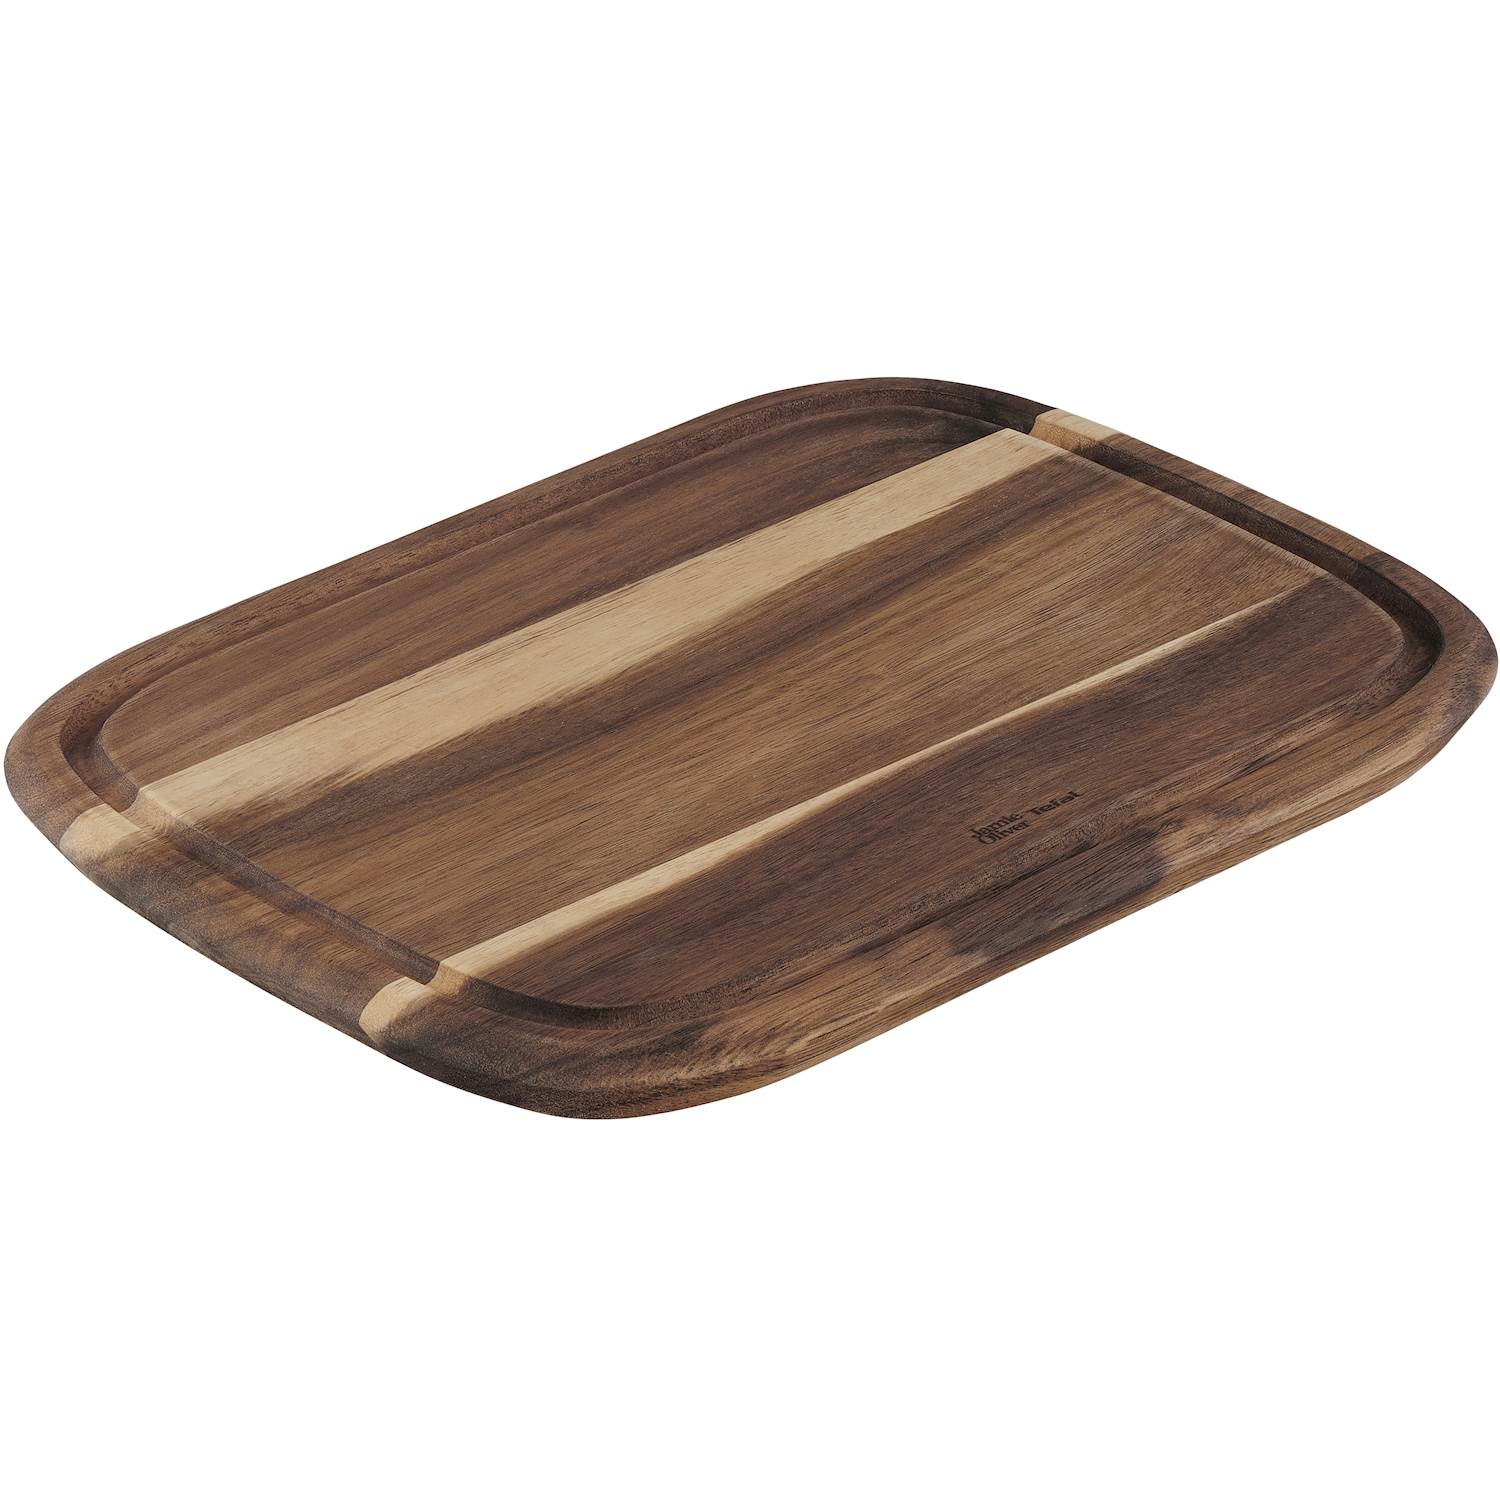 JAMIE OLIVER TEFAL Chopping Board  Small